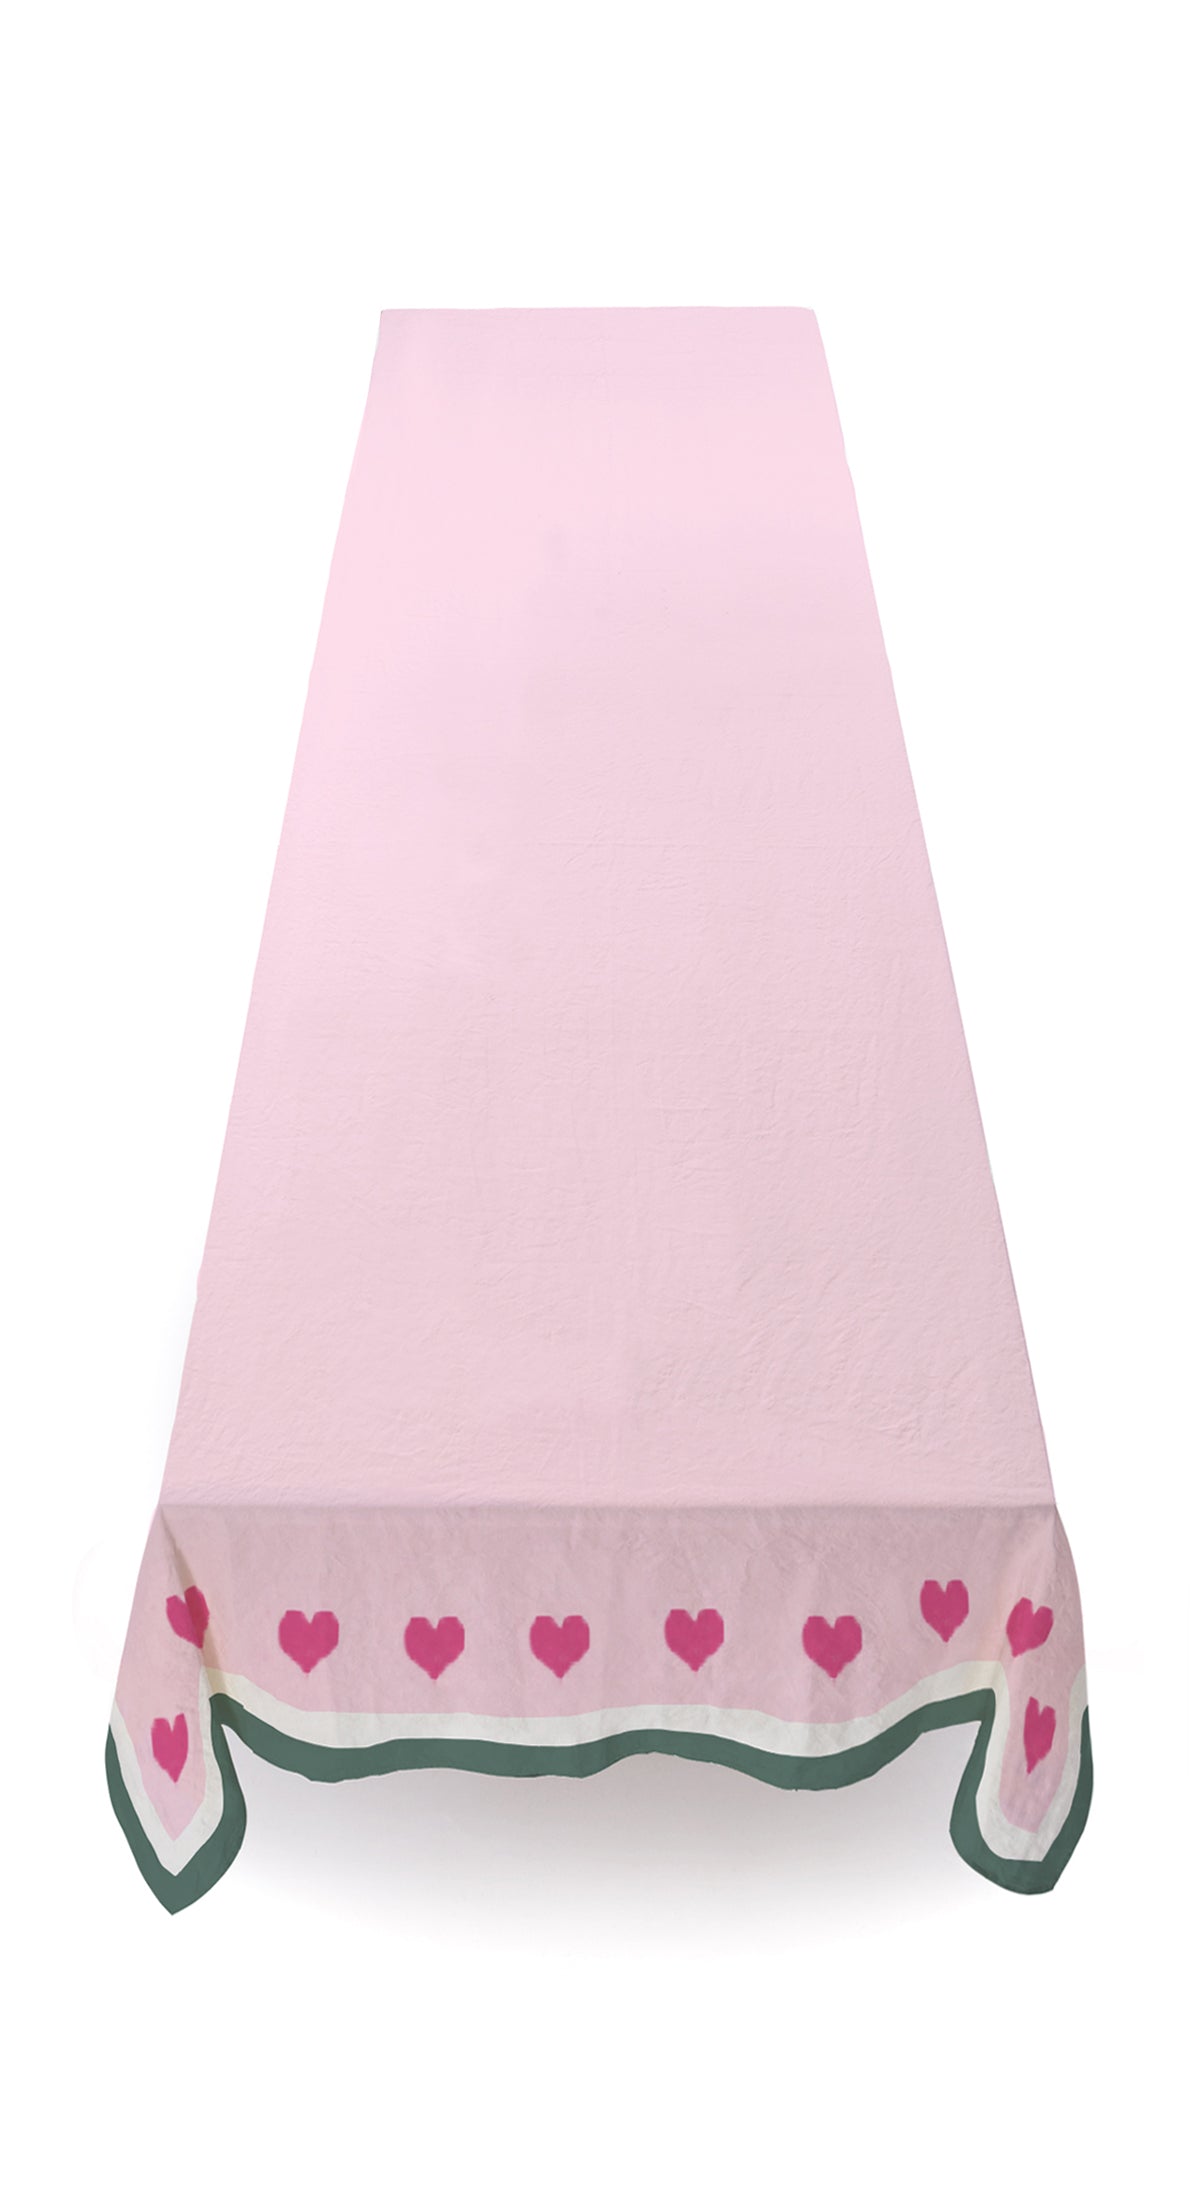 Summerill & Bishop x Lisou Heart Linen Tablecloth in Petal Pink and Forest Green